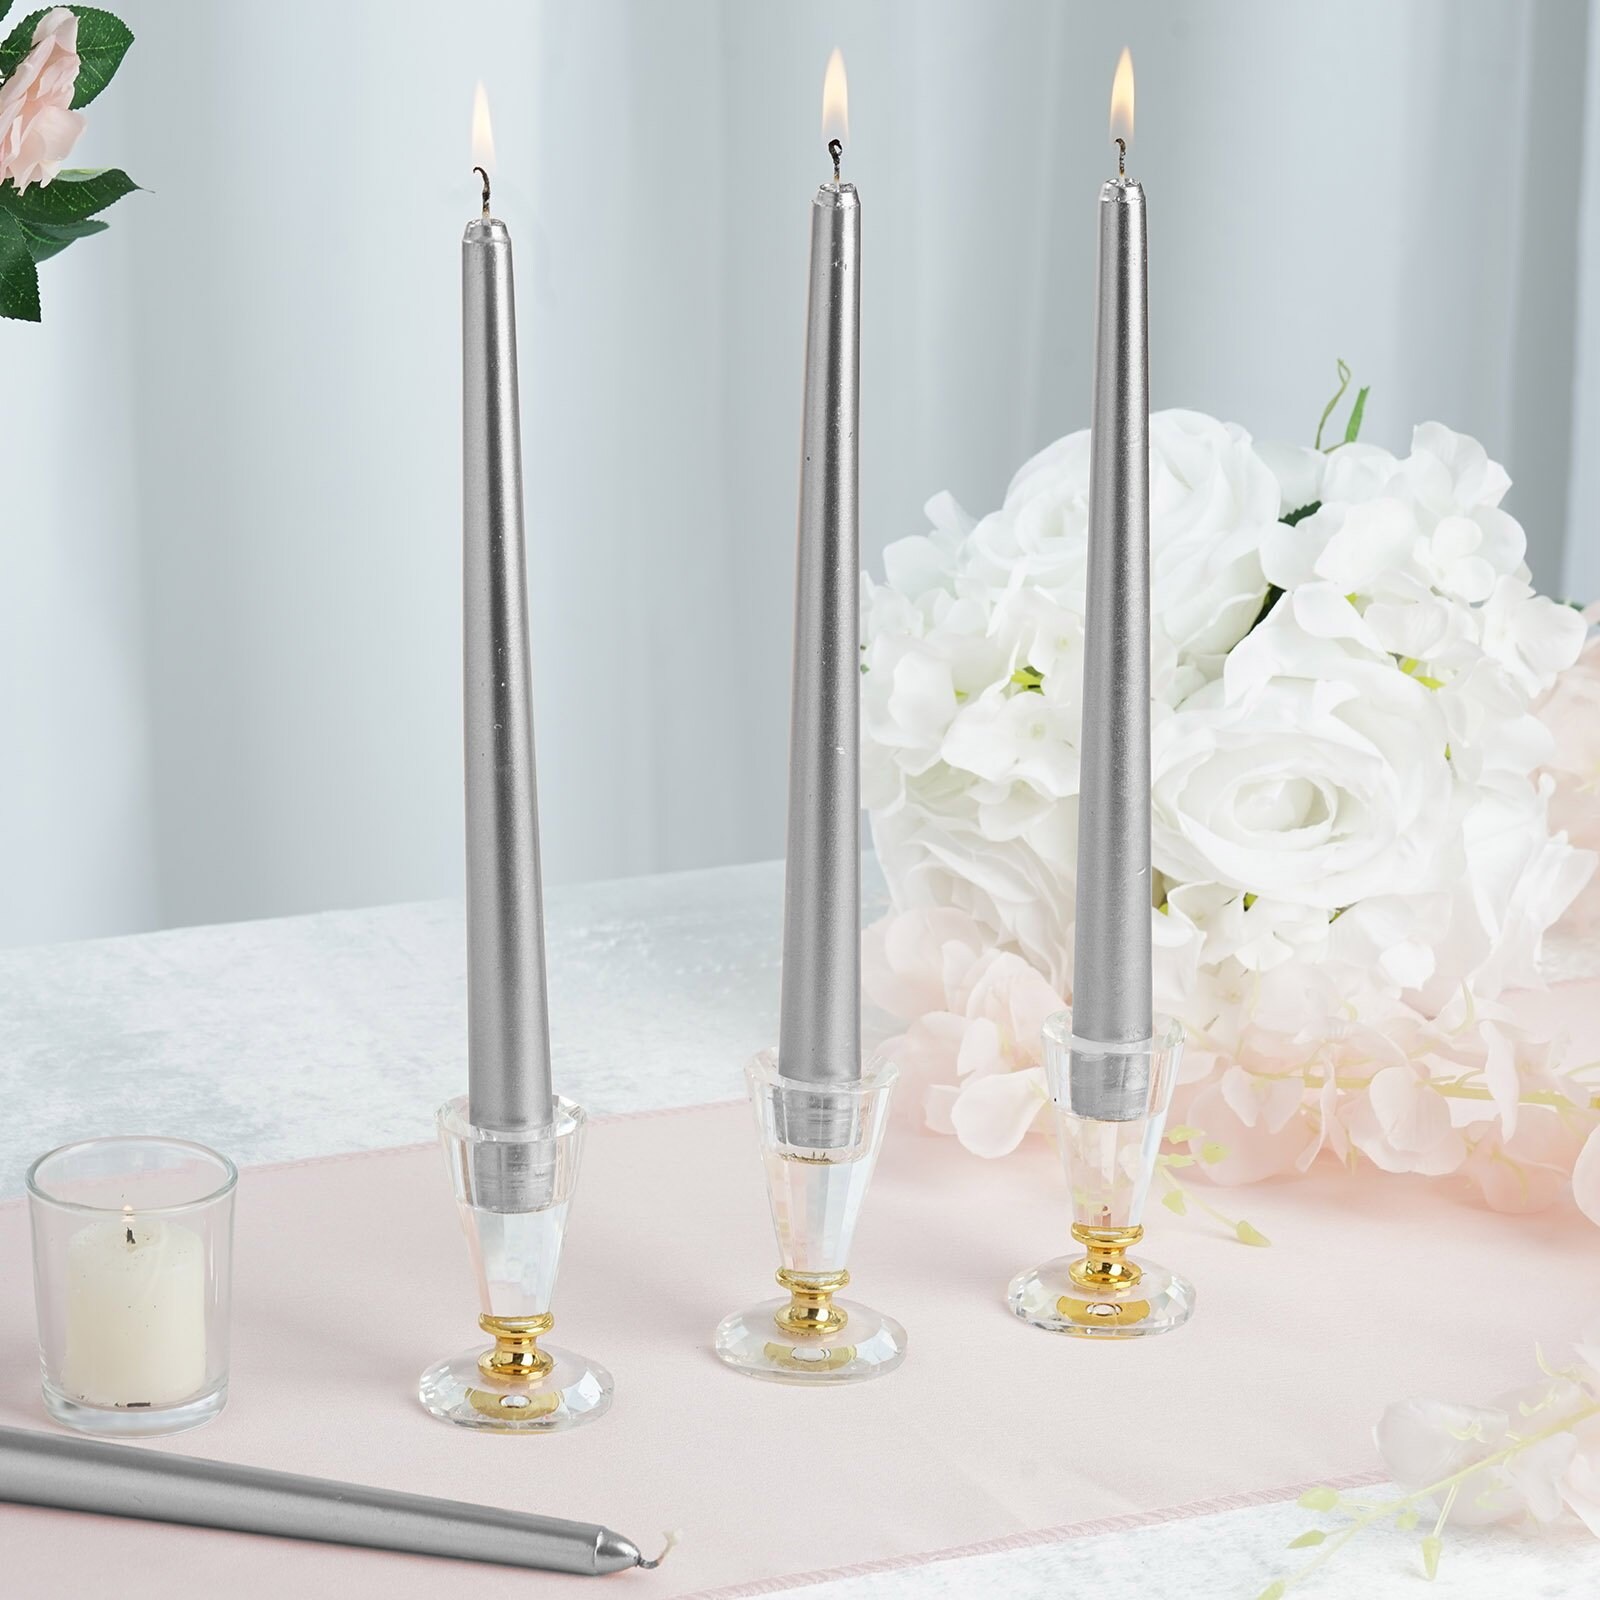 10 Silver Premium Taper Candles Taper Candles for Table - Etsy